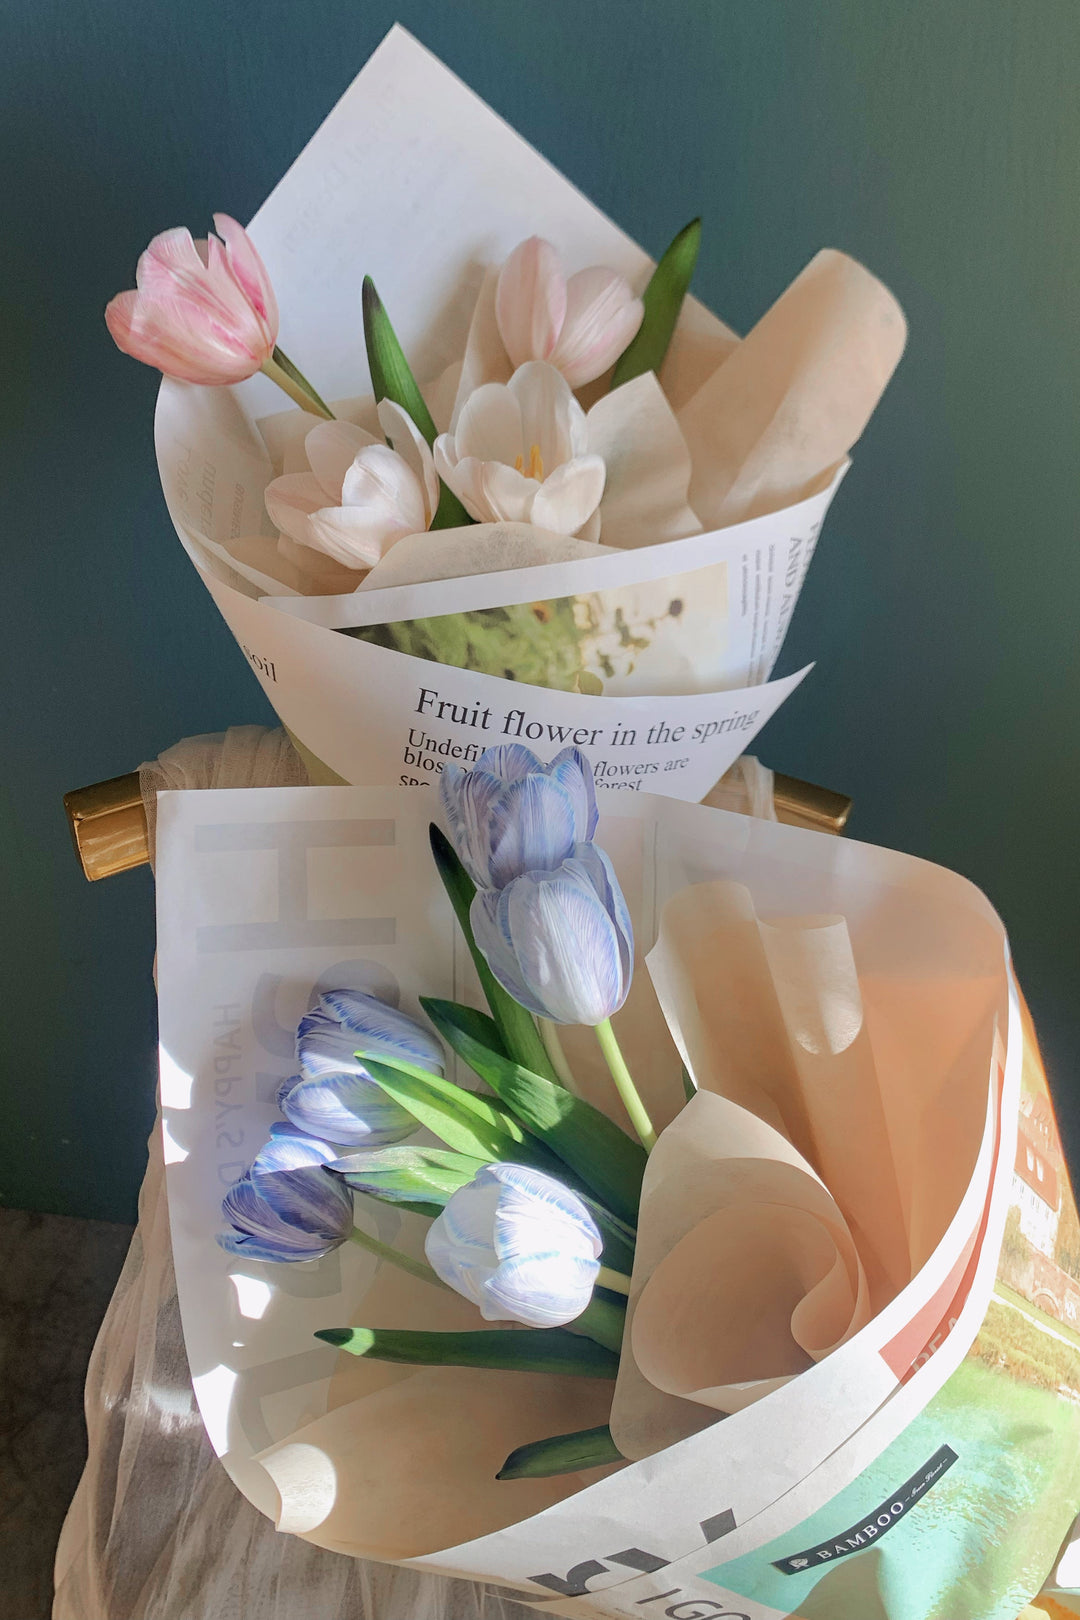 Holland tulips in a petite handy size, to order online for your same day bouquet delivery. Conveniently order online with Bamboo Green Florist today, best online penang florist.